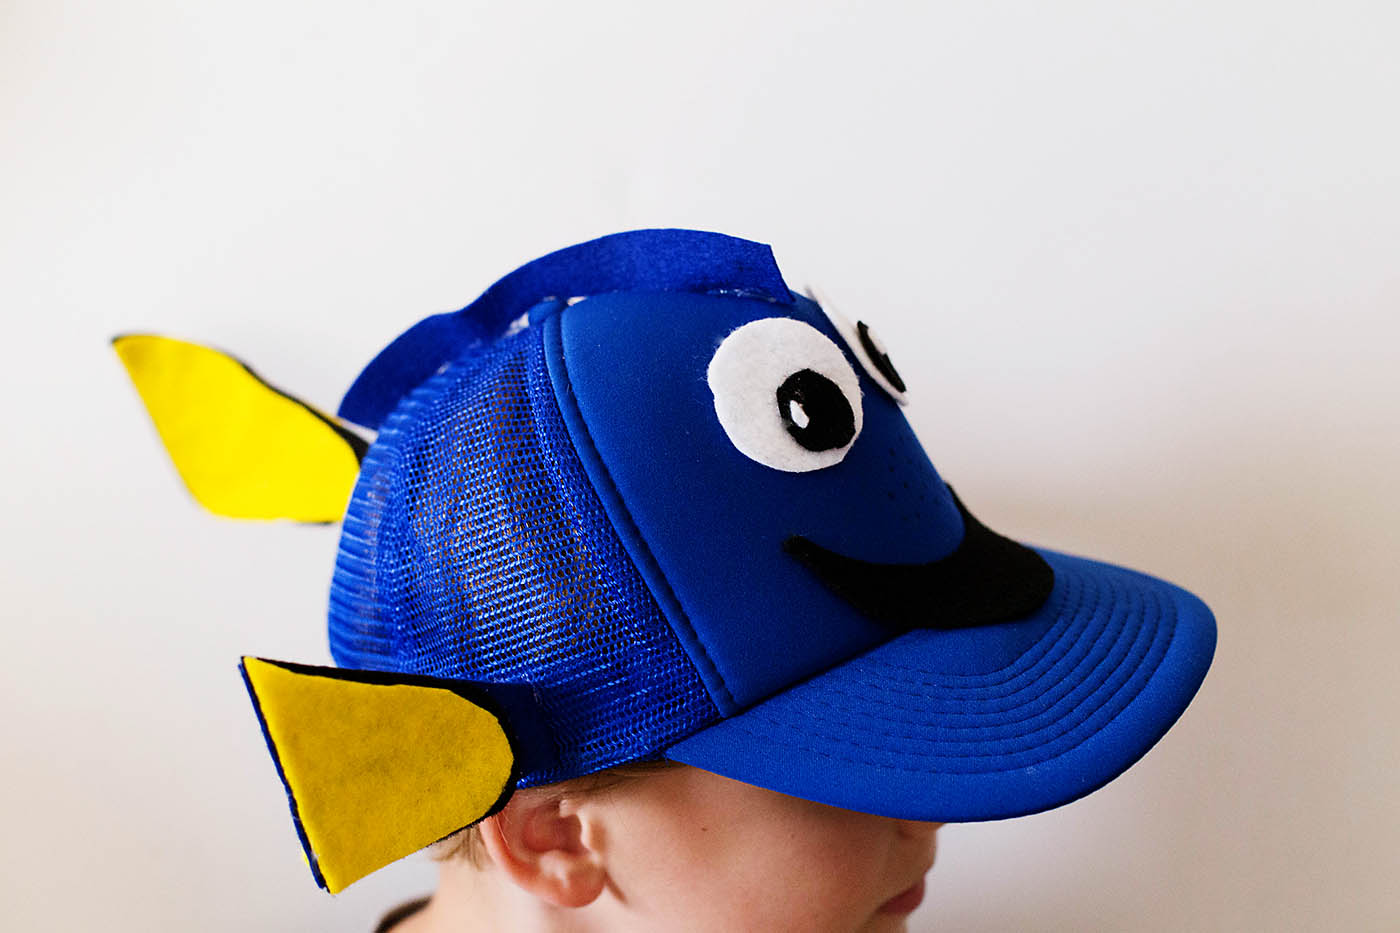 DIY Finding Dory hat perfect for an easy costume, trip to Disneyland or Wal...